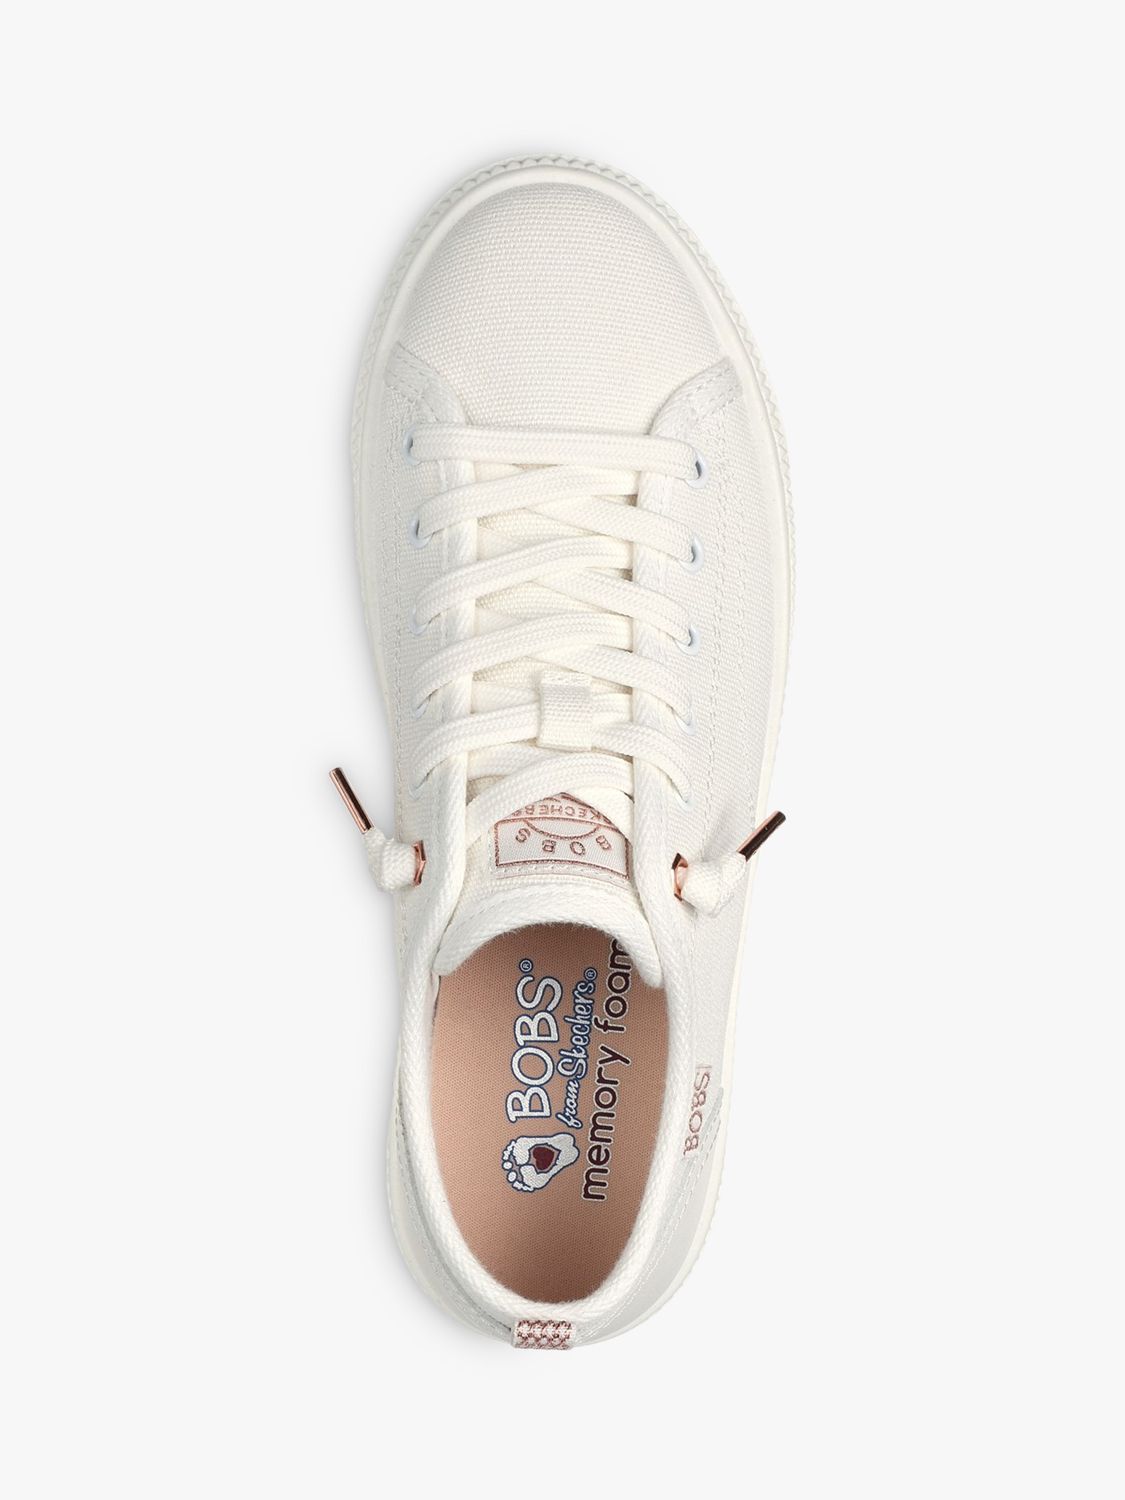 Skechers BOBS Copa Chunky Trainers, Off White at John Lewis & Partners